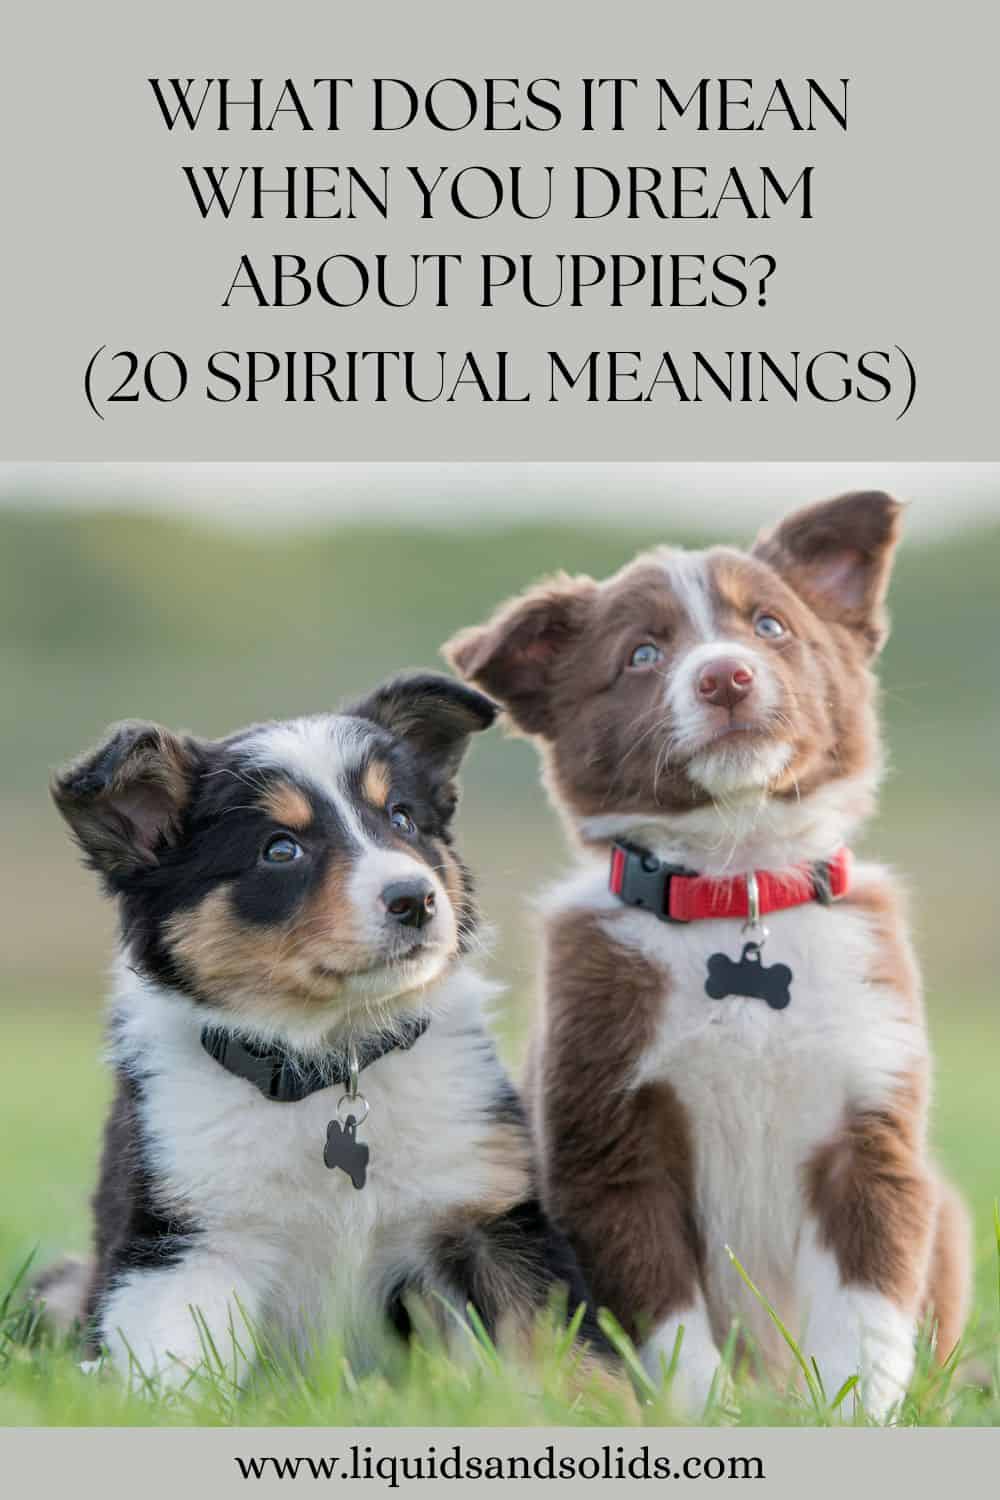 What Does It Mean When You Dream About Puppies? (20 Spiritual Meanings)